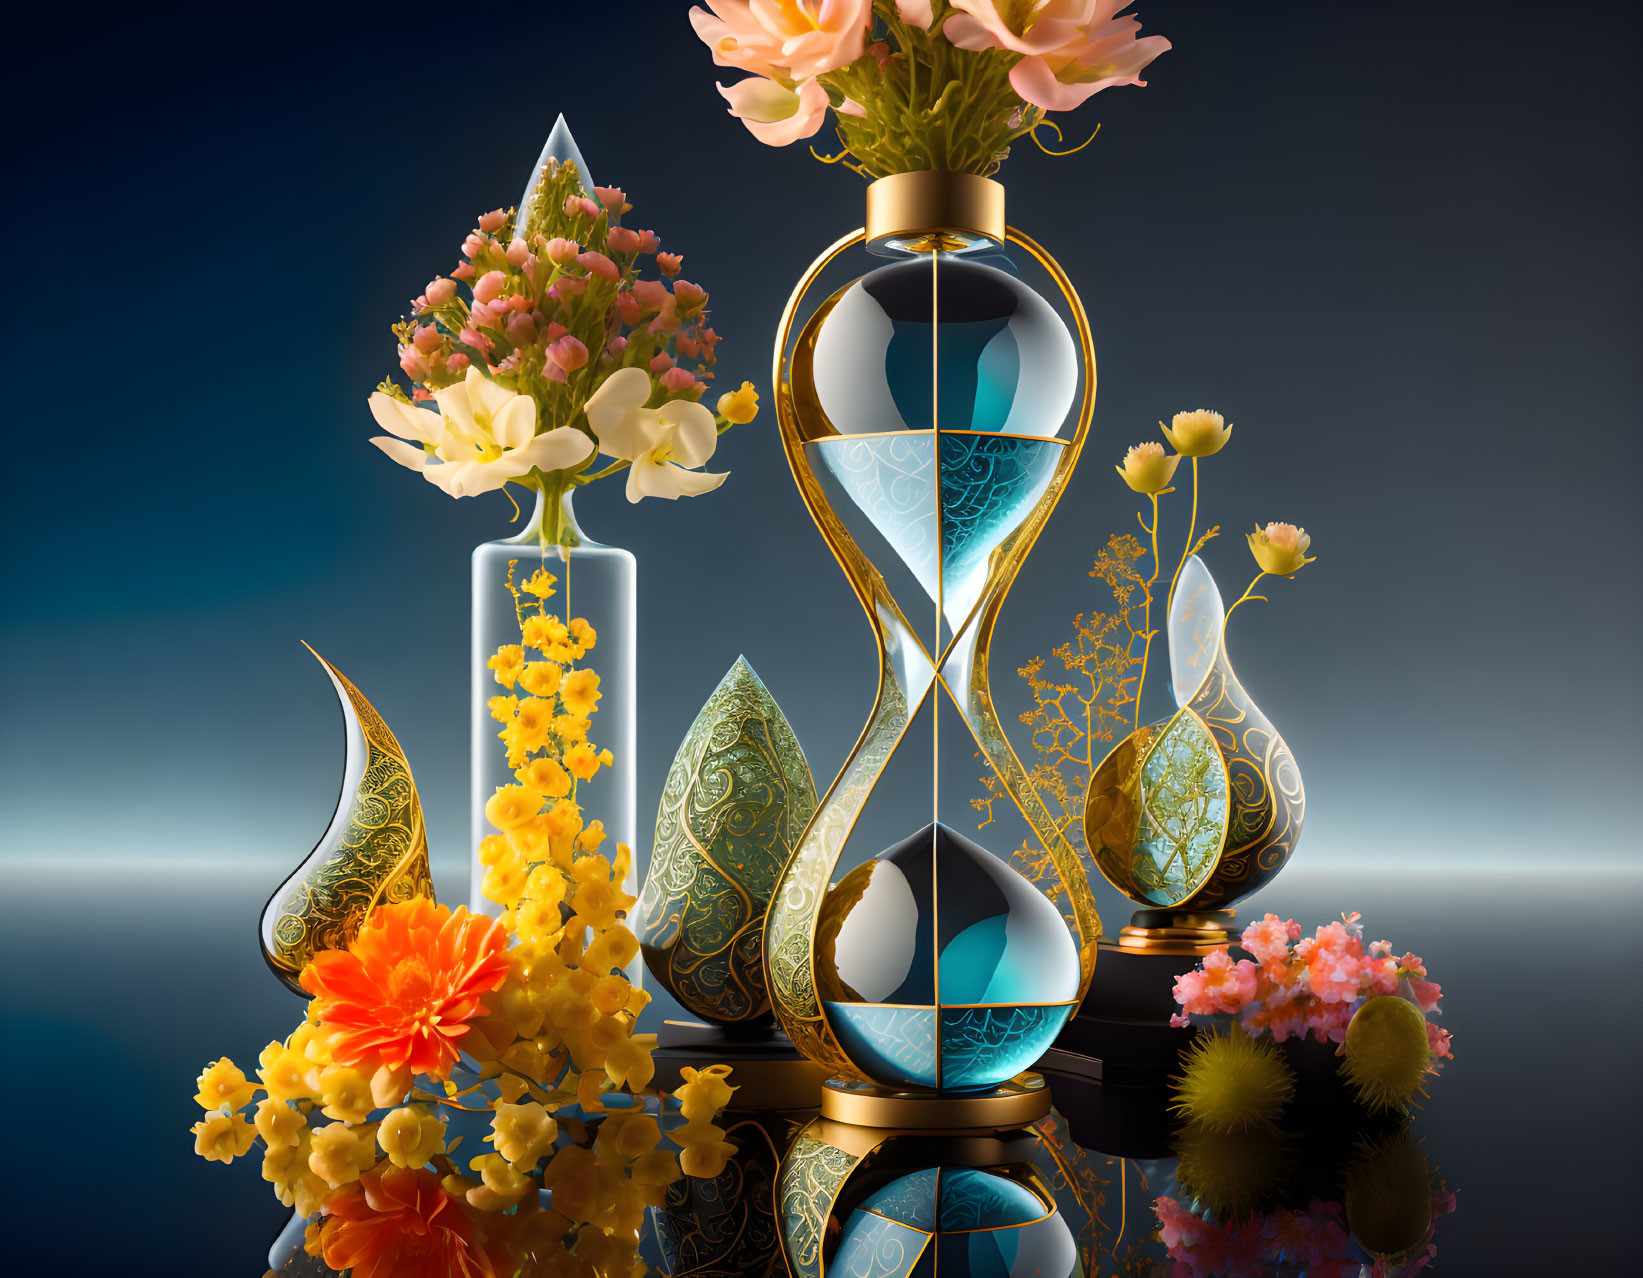 Colorful Hourglass with Floral Elements, Candle, and Vases on Reflective Surface